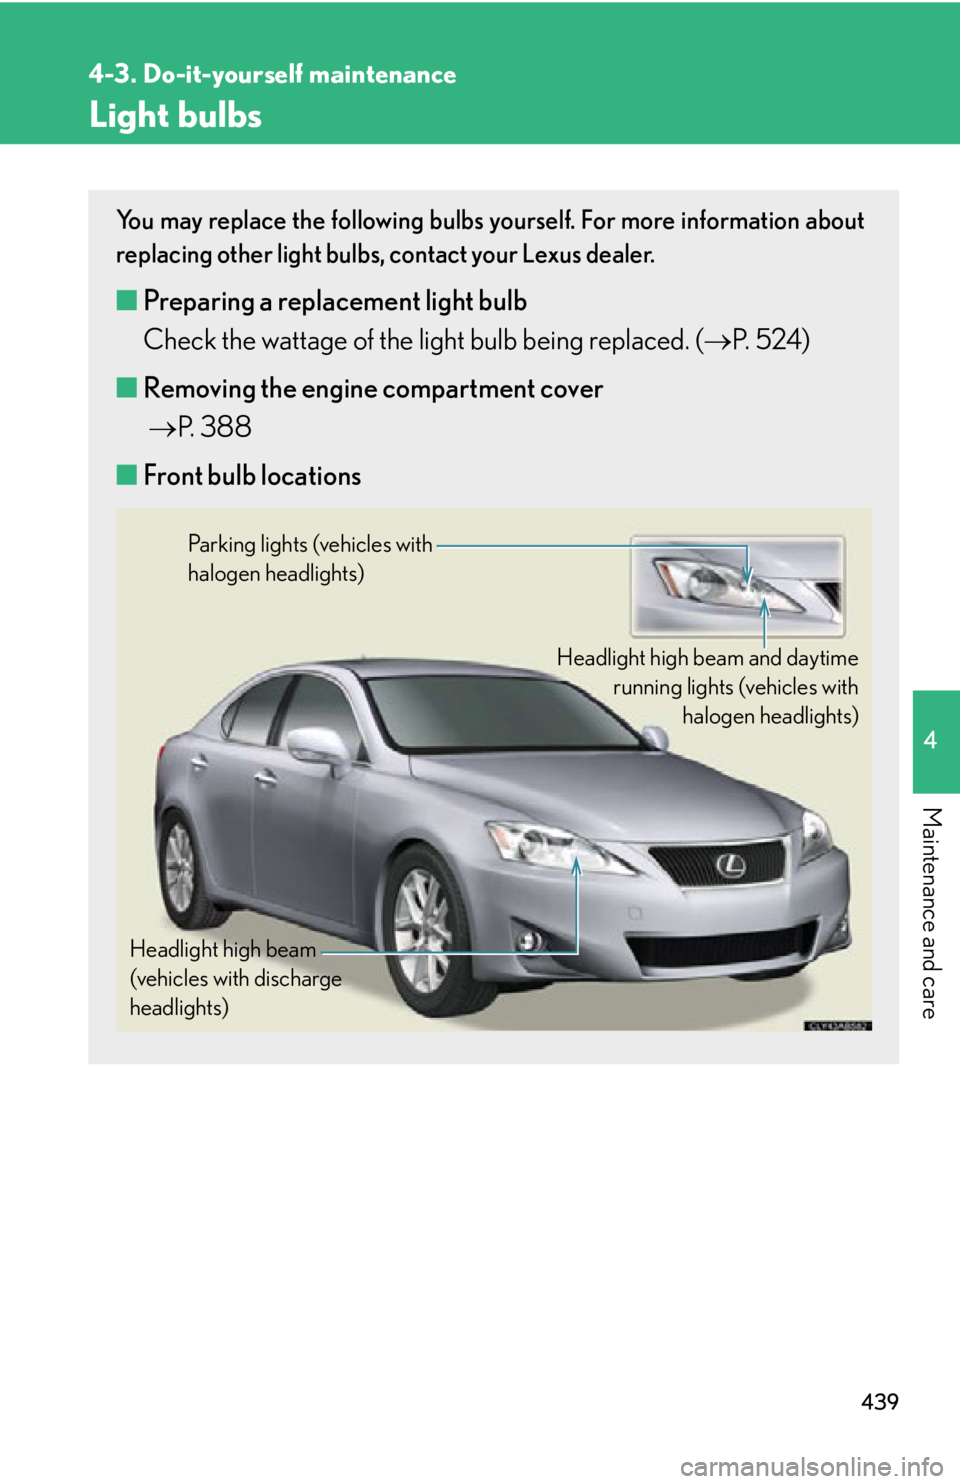 Lexus IS250 2011  Navigation Manual / LEXUS 2011 IS250/IS350 OWNERS MANUAL (OM53839U) 439
4-3. Do-it-yourself maintenance
4
Maintenance and care
Light bulbs
You may replace the following bulbs yourself. For more information about
replacing other light bulbs, contact your Lexus dealer.
